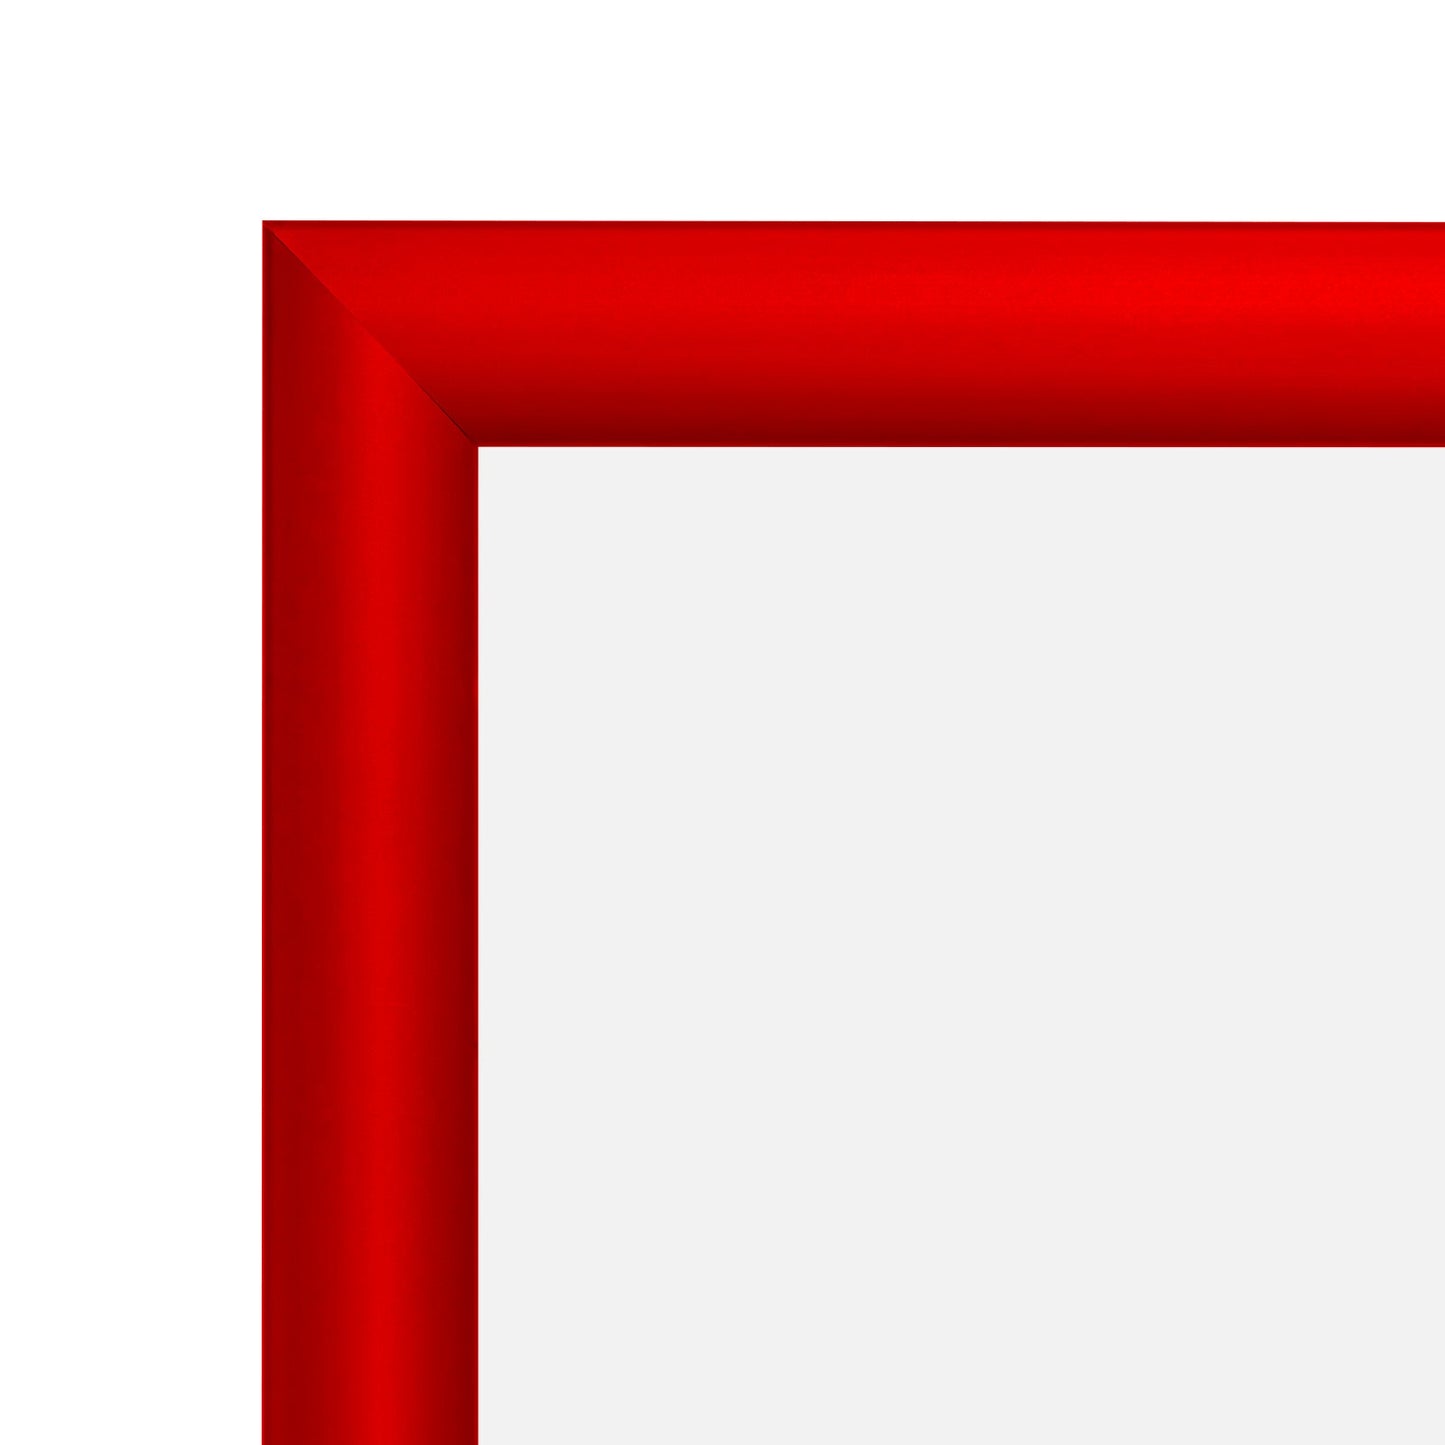 22x33 Red SnapeZo® Snap Frame - 1.2" Profile